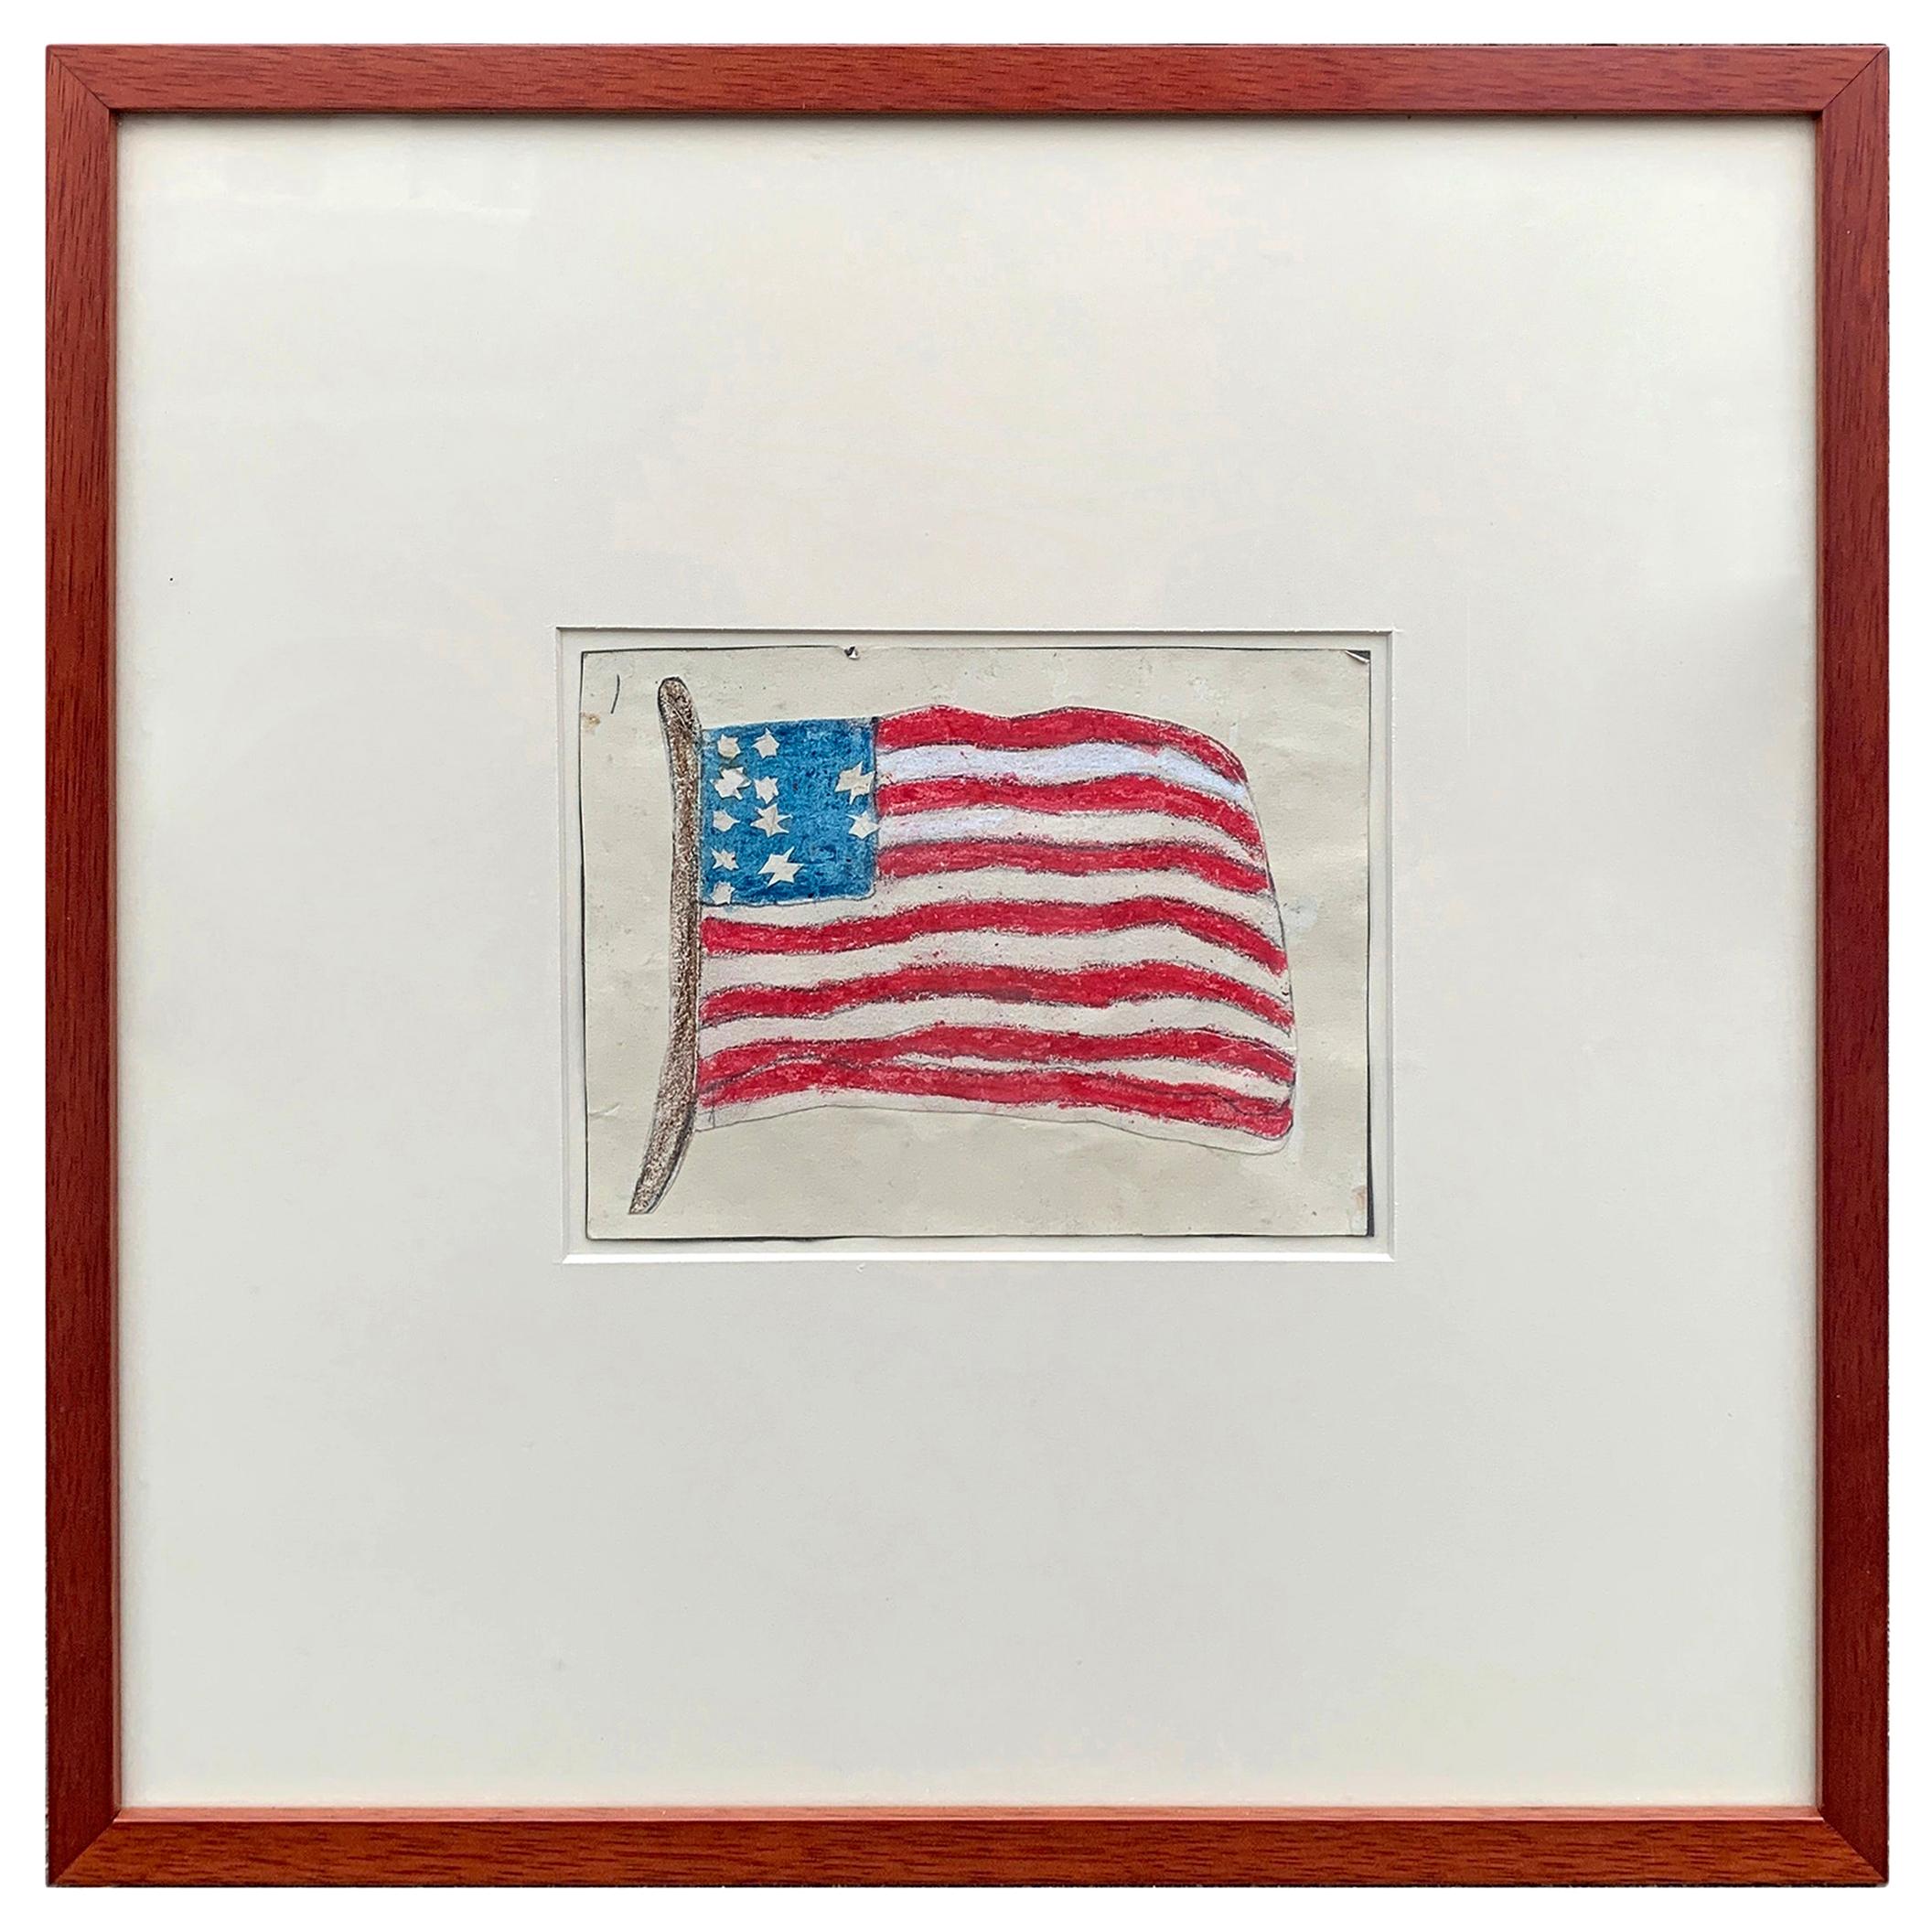 Framed Naive American Flag Collage